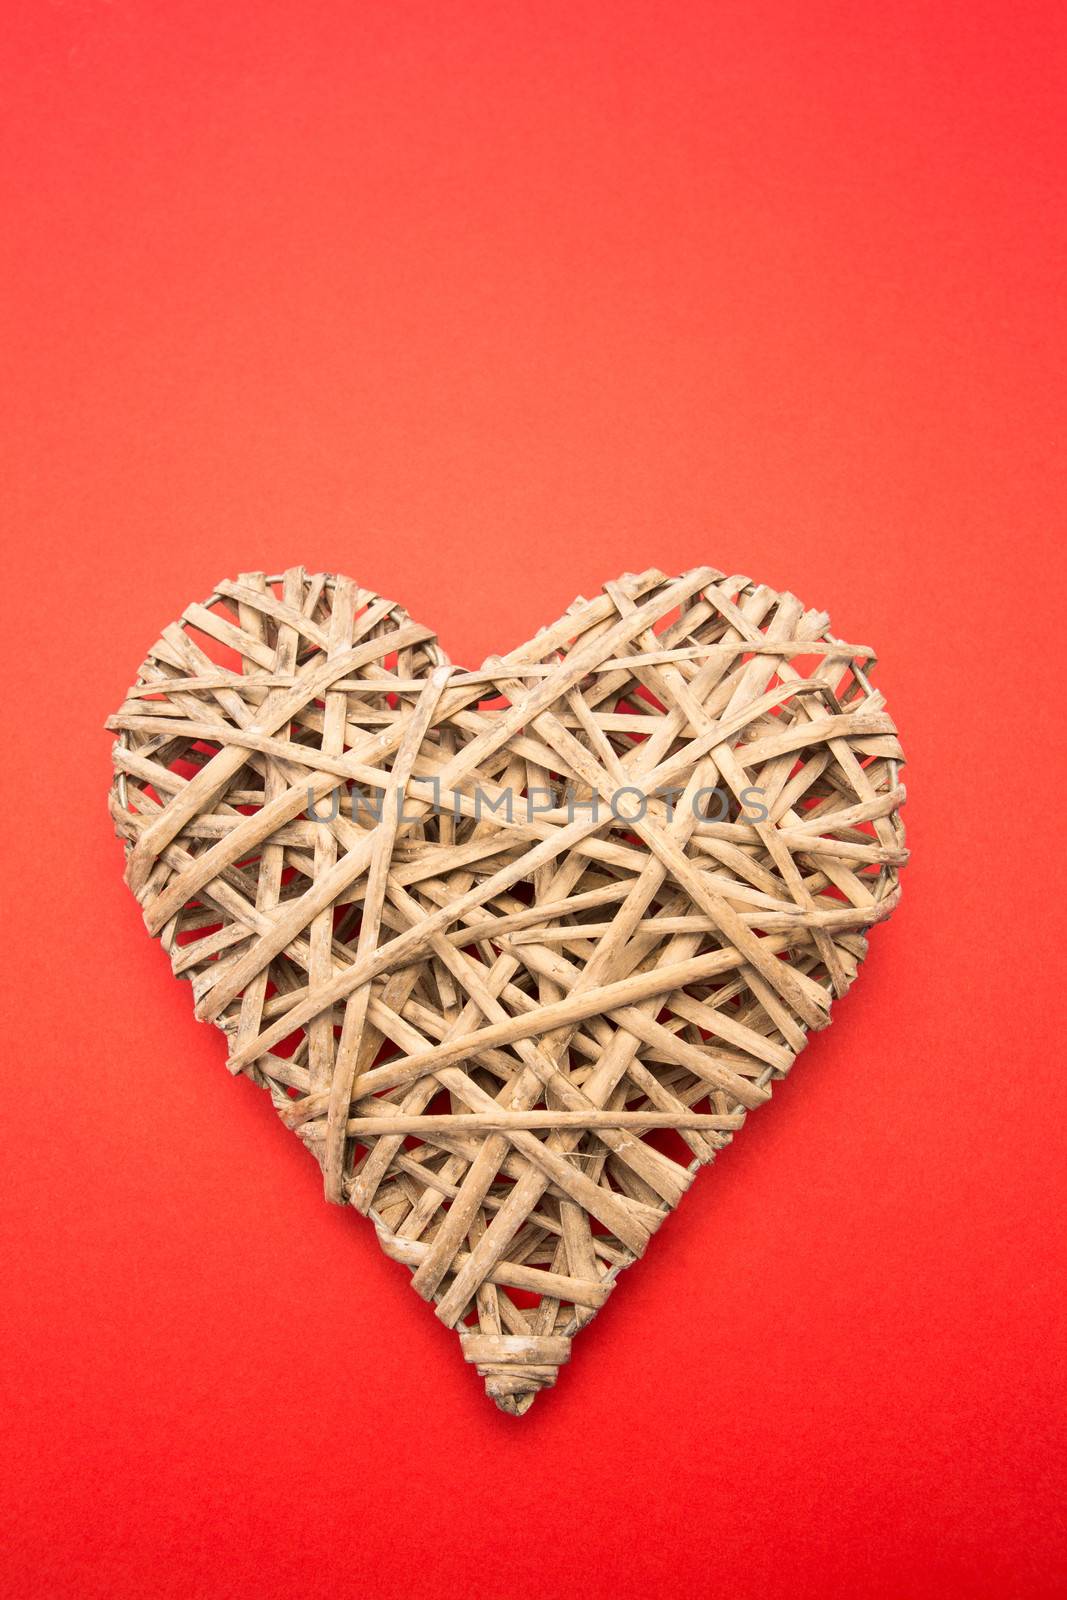 Wicker heart ornament on red background